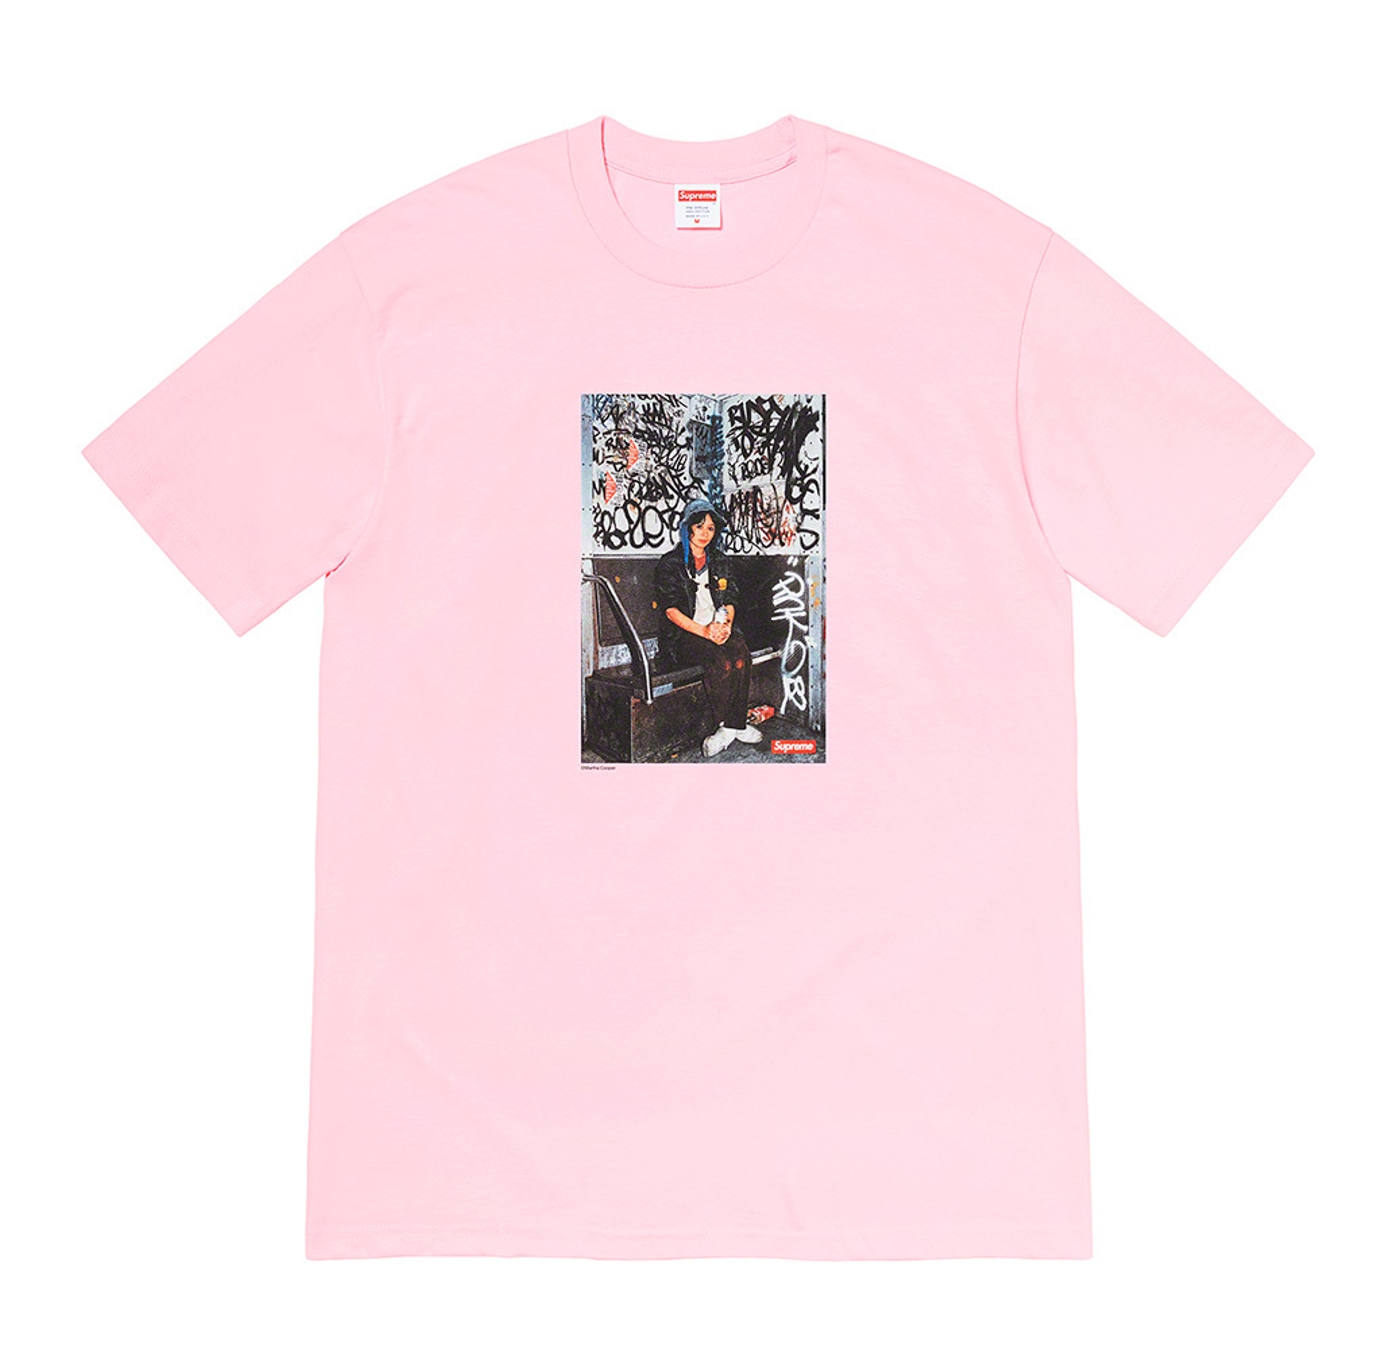 Lady Pink Tee. Original photography by Martha Cooper. (13/20)